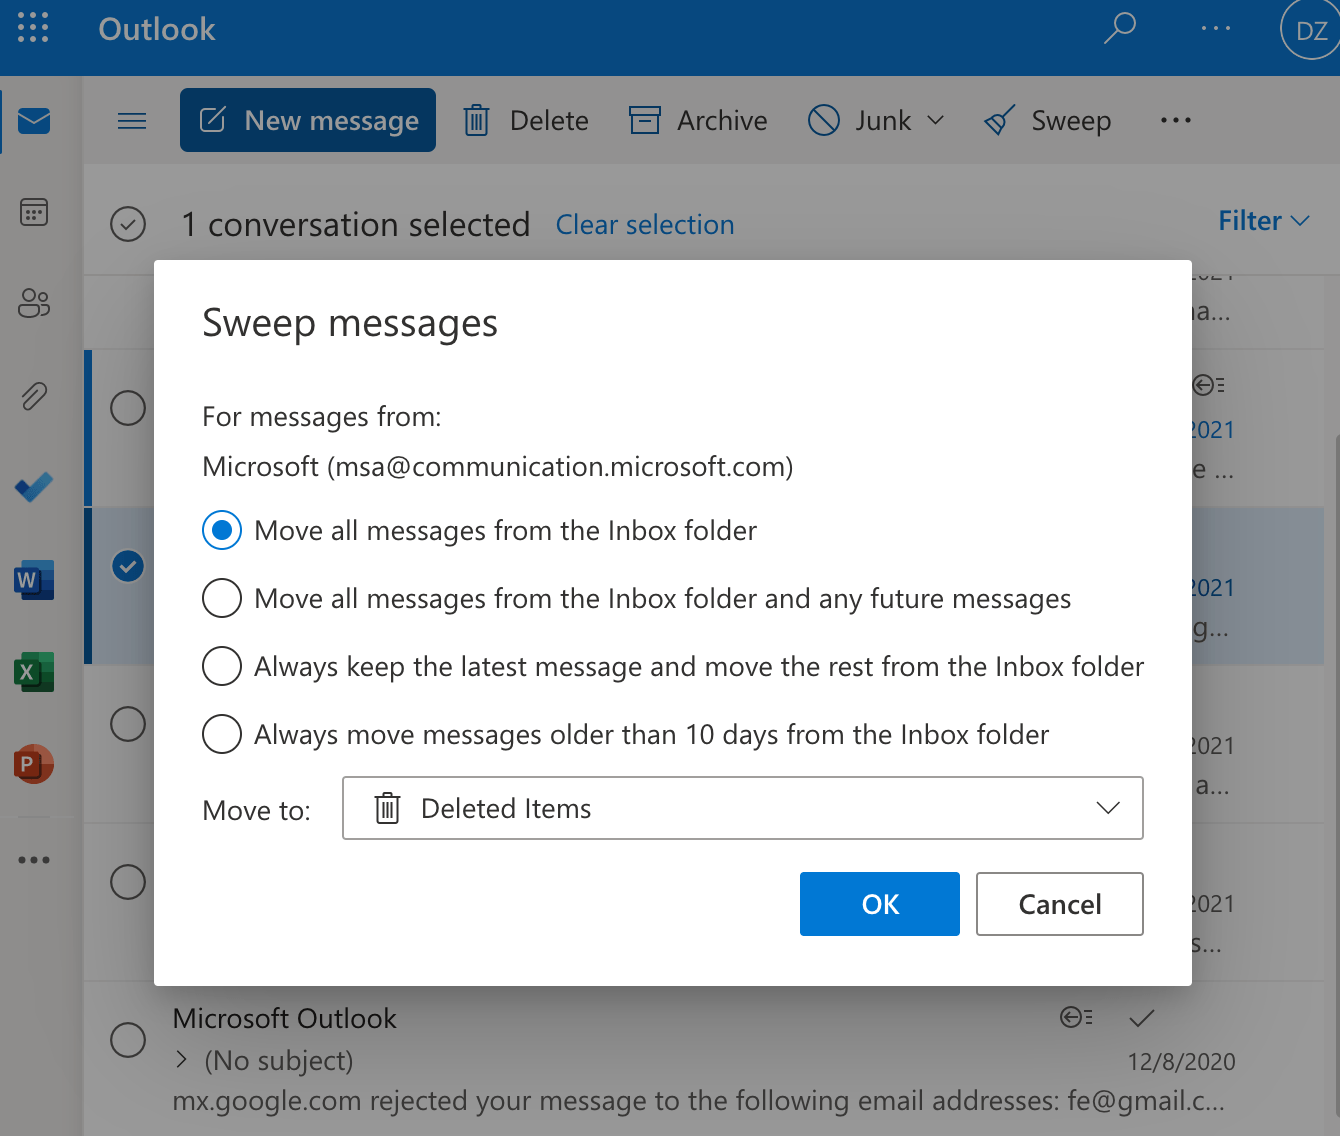 Move all messages from inbox folder